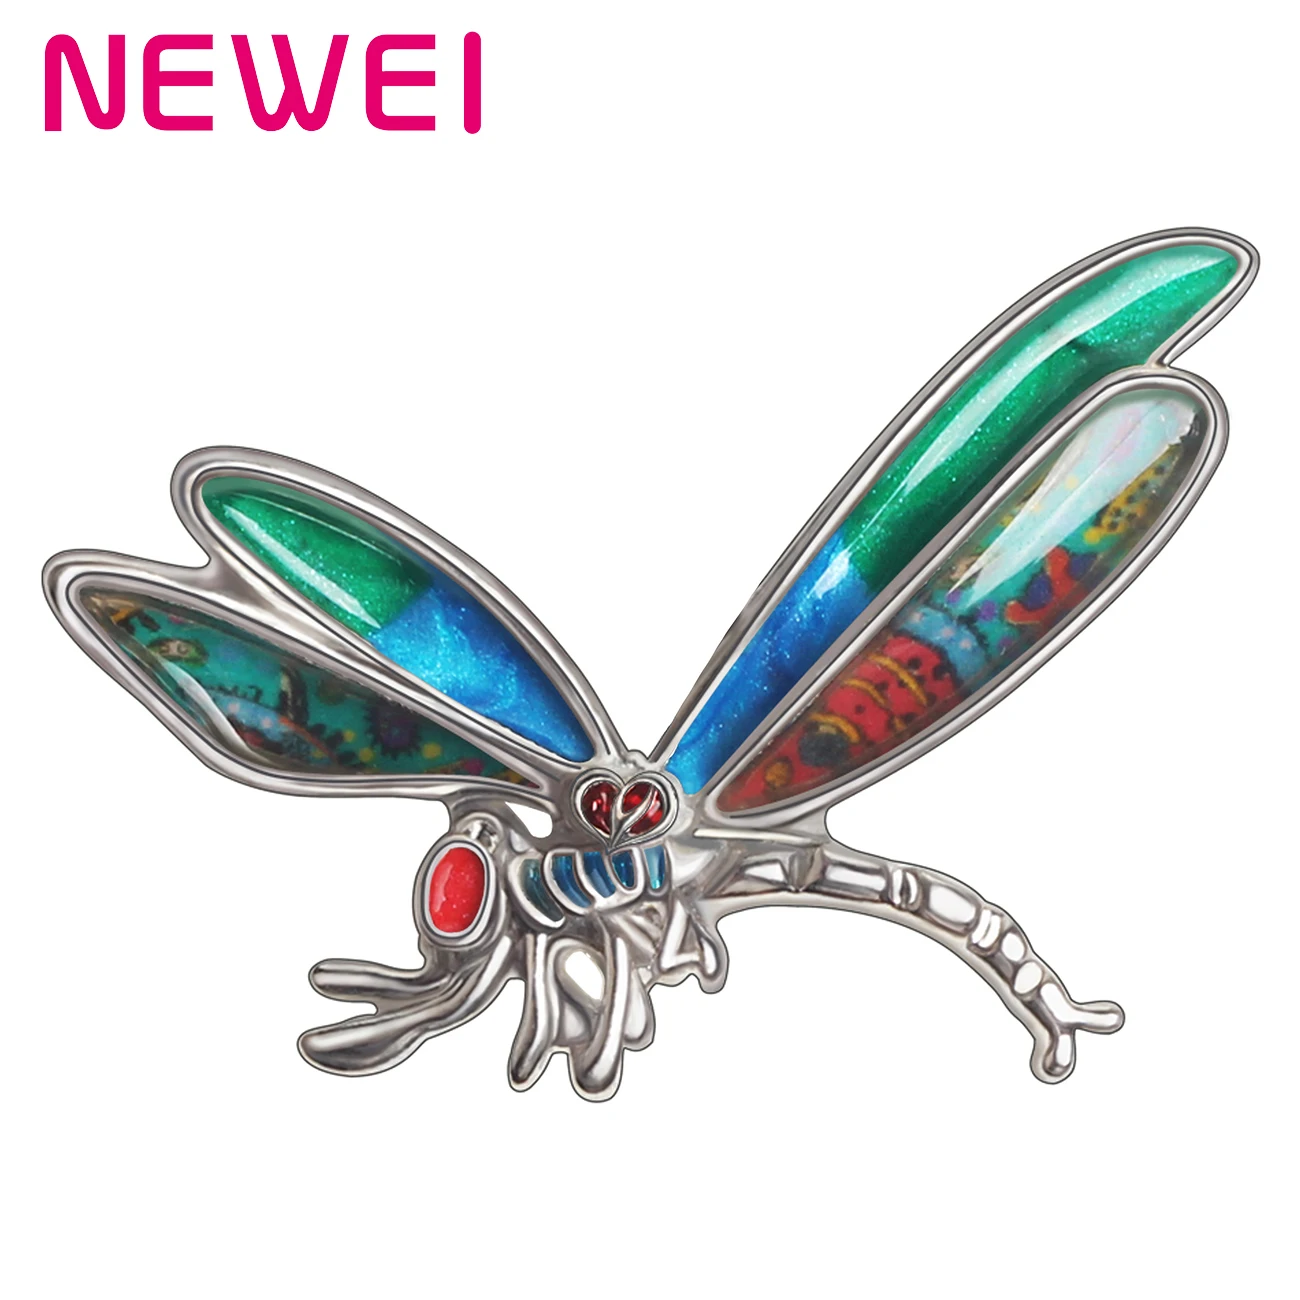 

NEWEI Enamel Alloy Metal Floral Cute Dragonfly Brooches Unique Insect Pin Scarf Jewelry For Women Teens Girls Party Charm Gifts